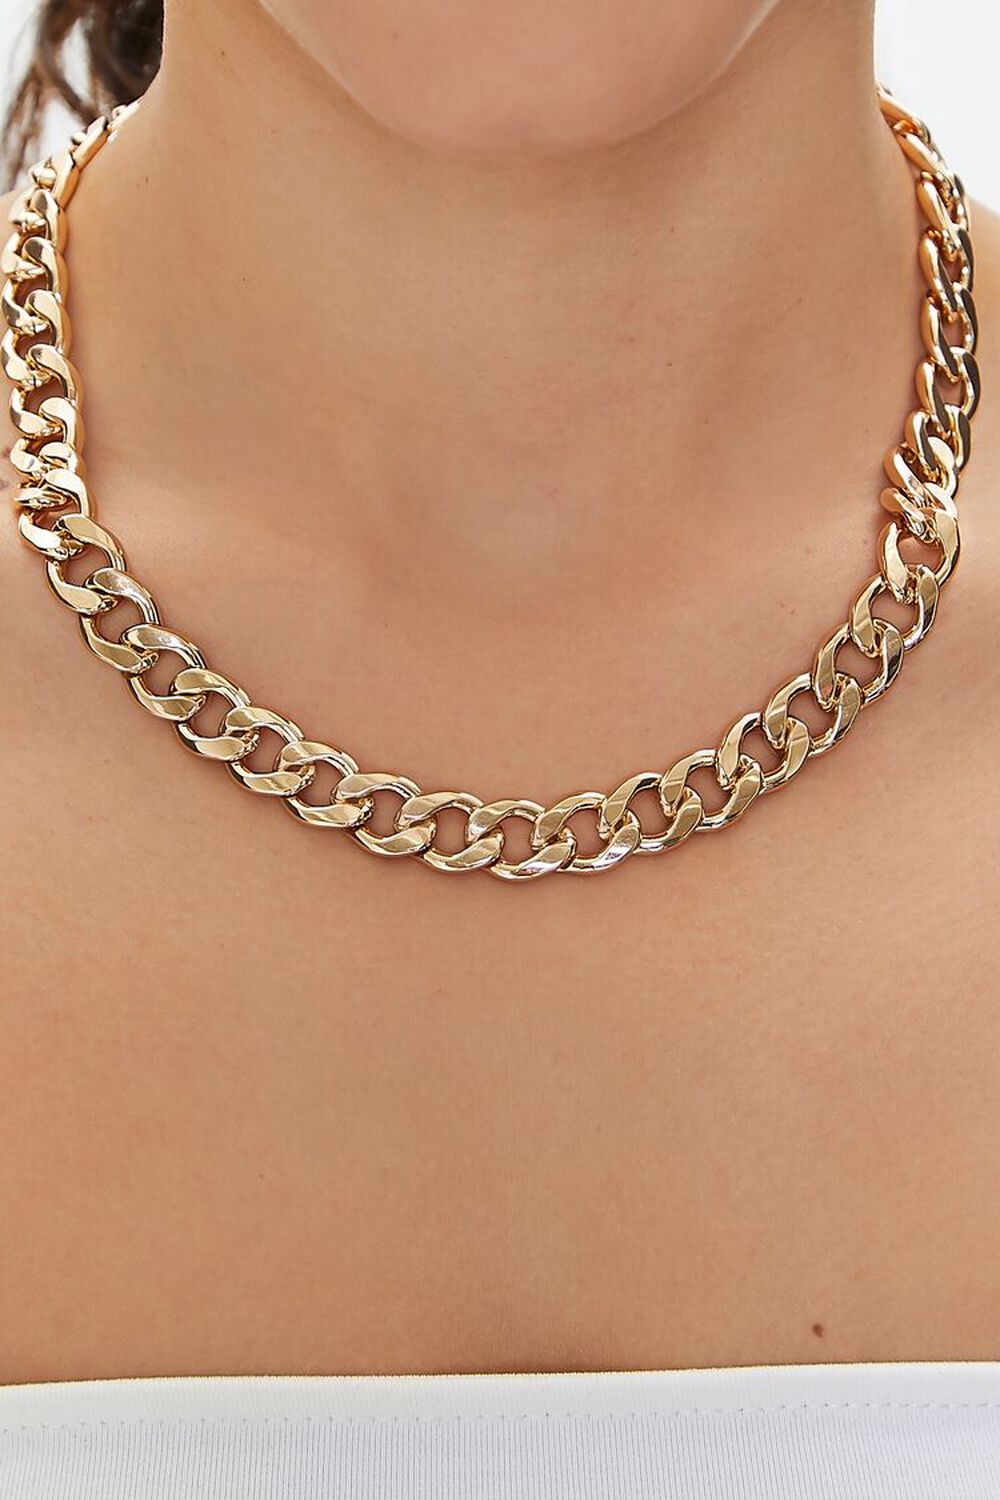 GOLD Upcycled Chunky Chain Necklace, image 1